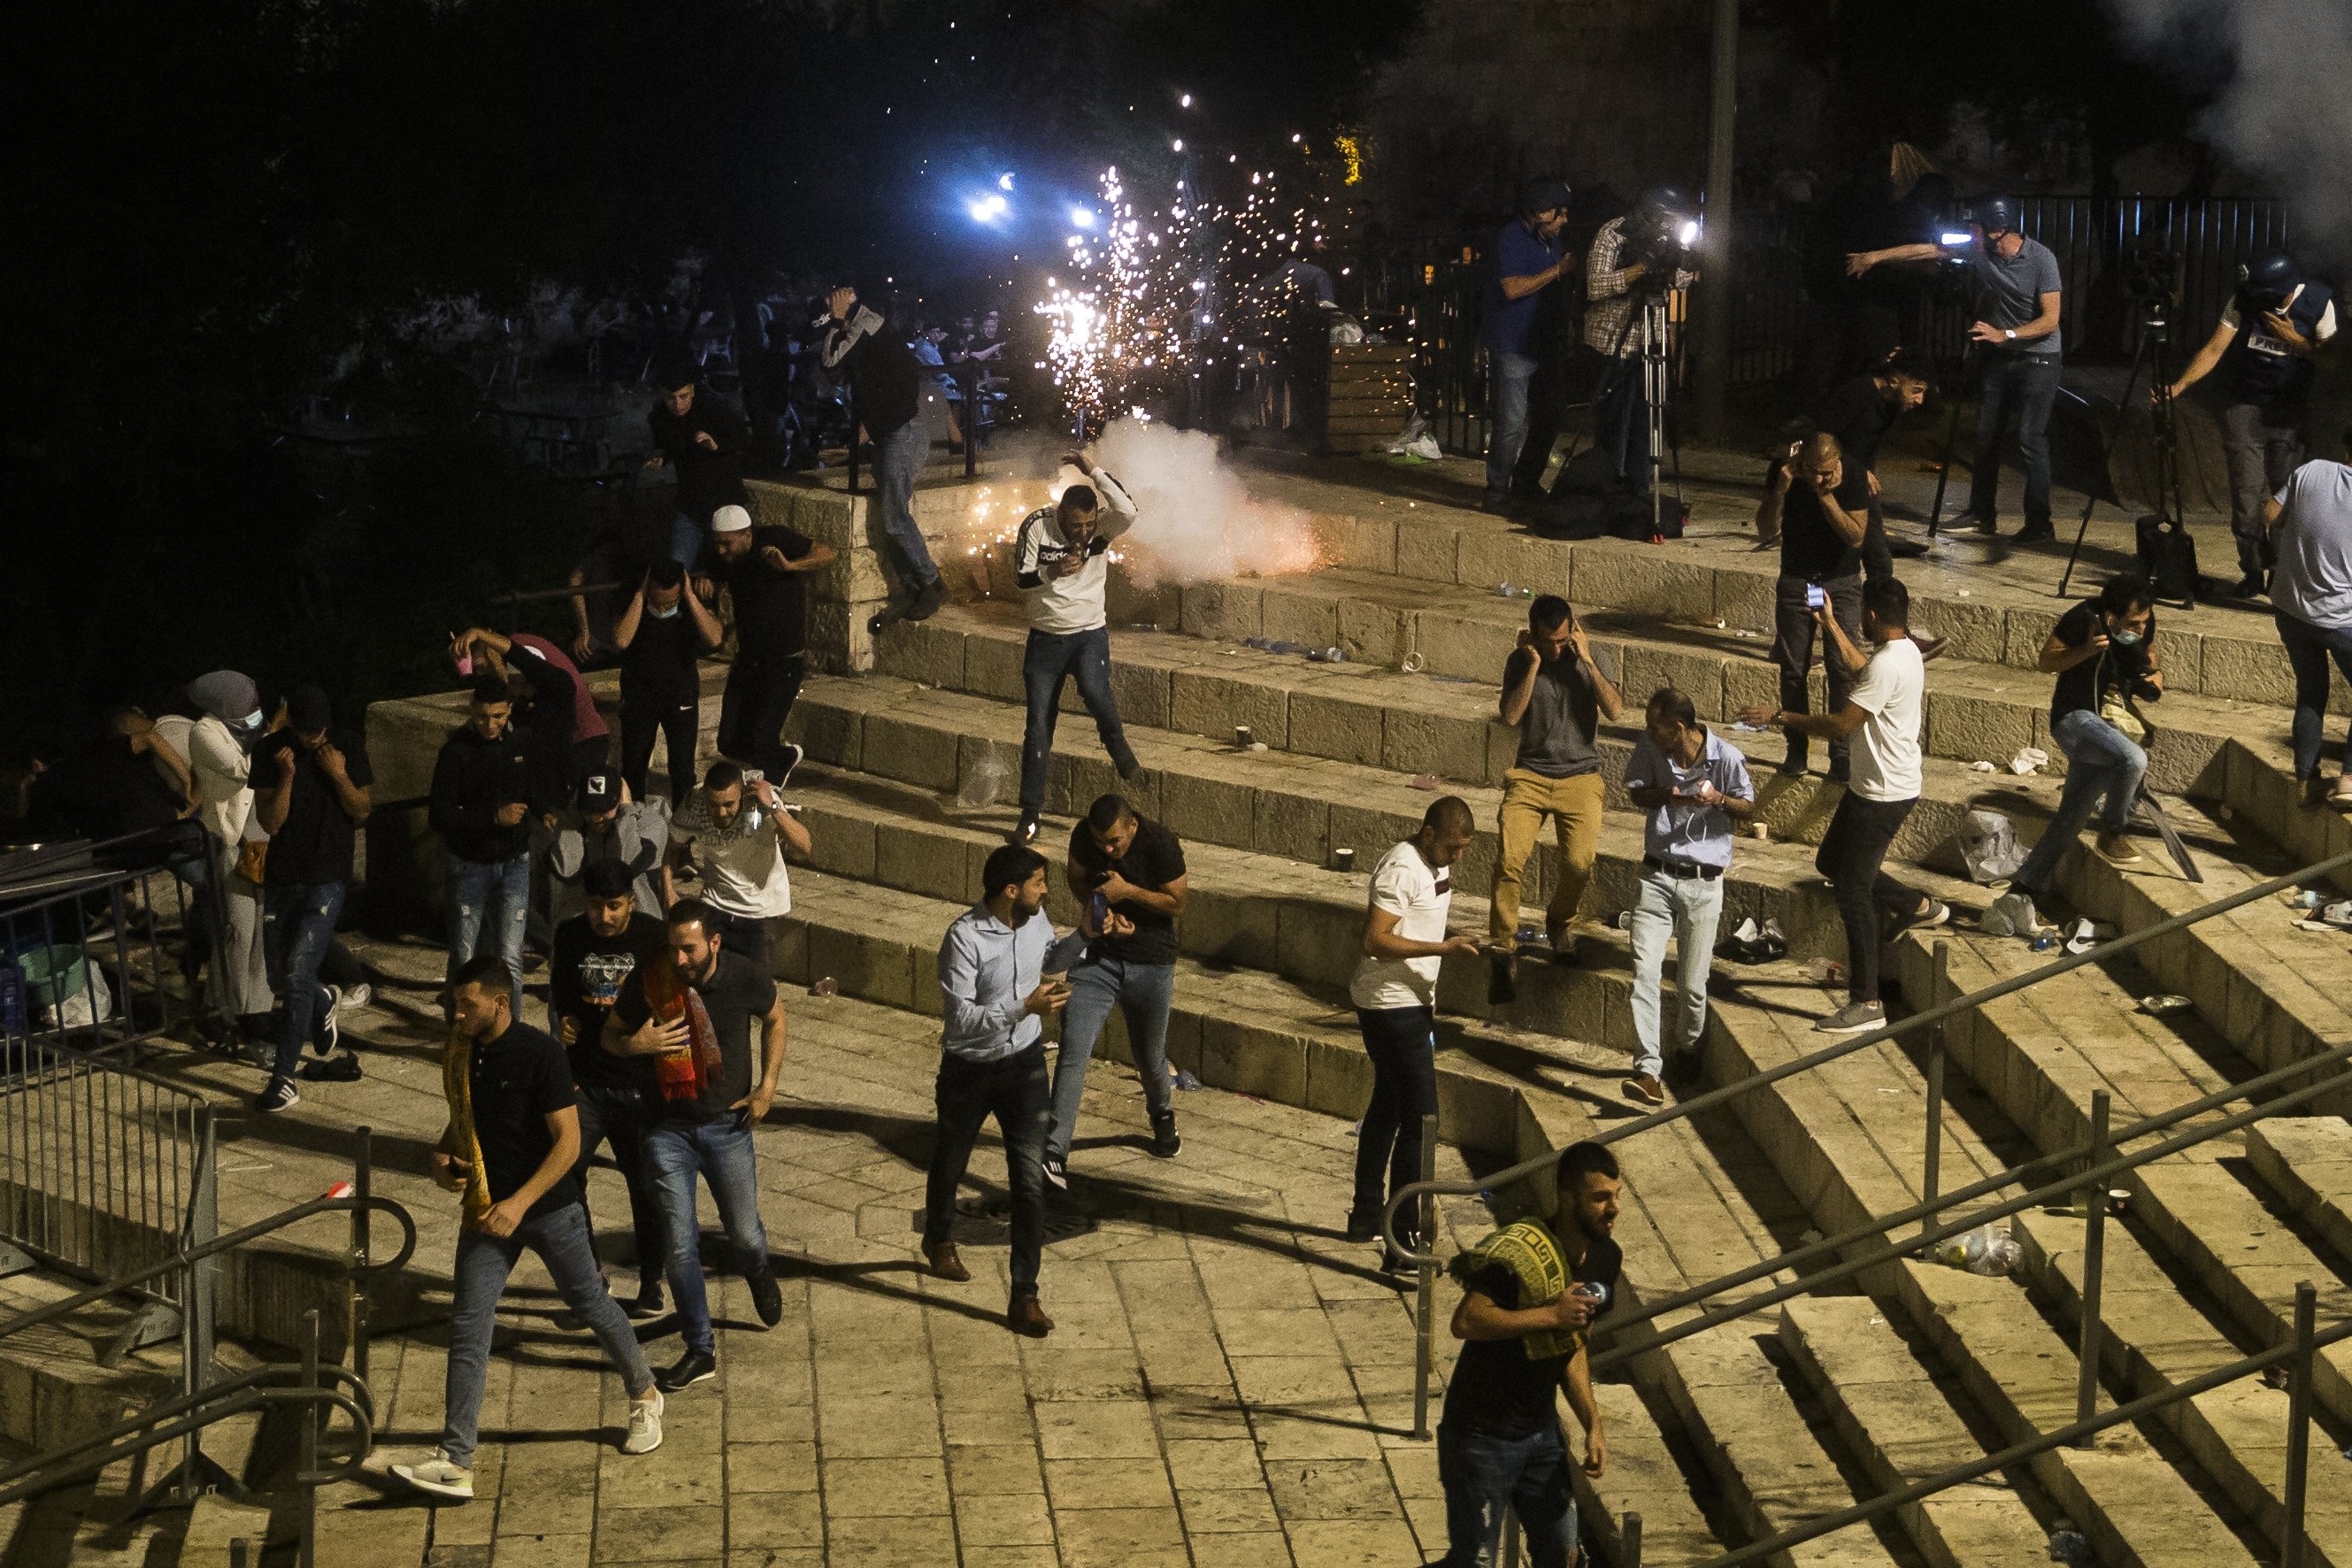 Palestinians escape from a stun grenade fired by Israeli forces at Damascus Gate during the holy month of Ramadan, in East Jerusalem, occupied Palestine, May 8, 2021. (Photo by Getty Images)